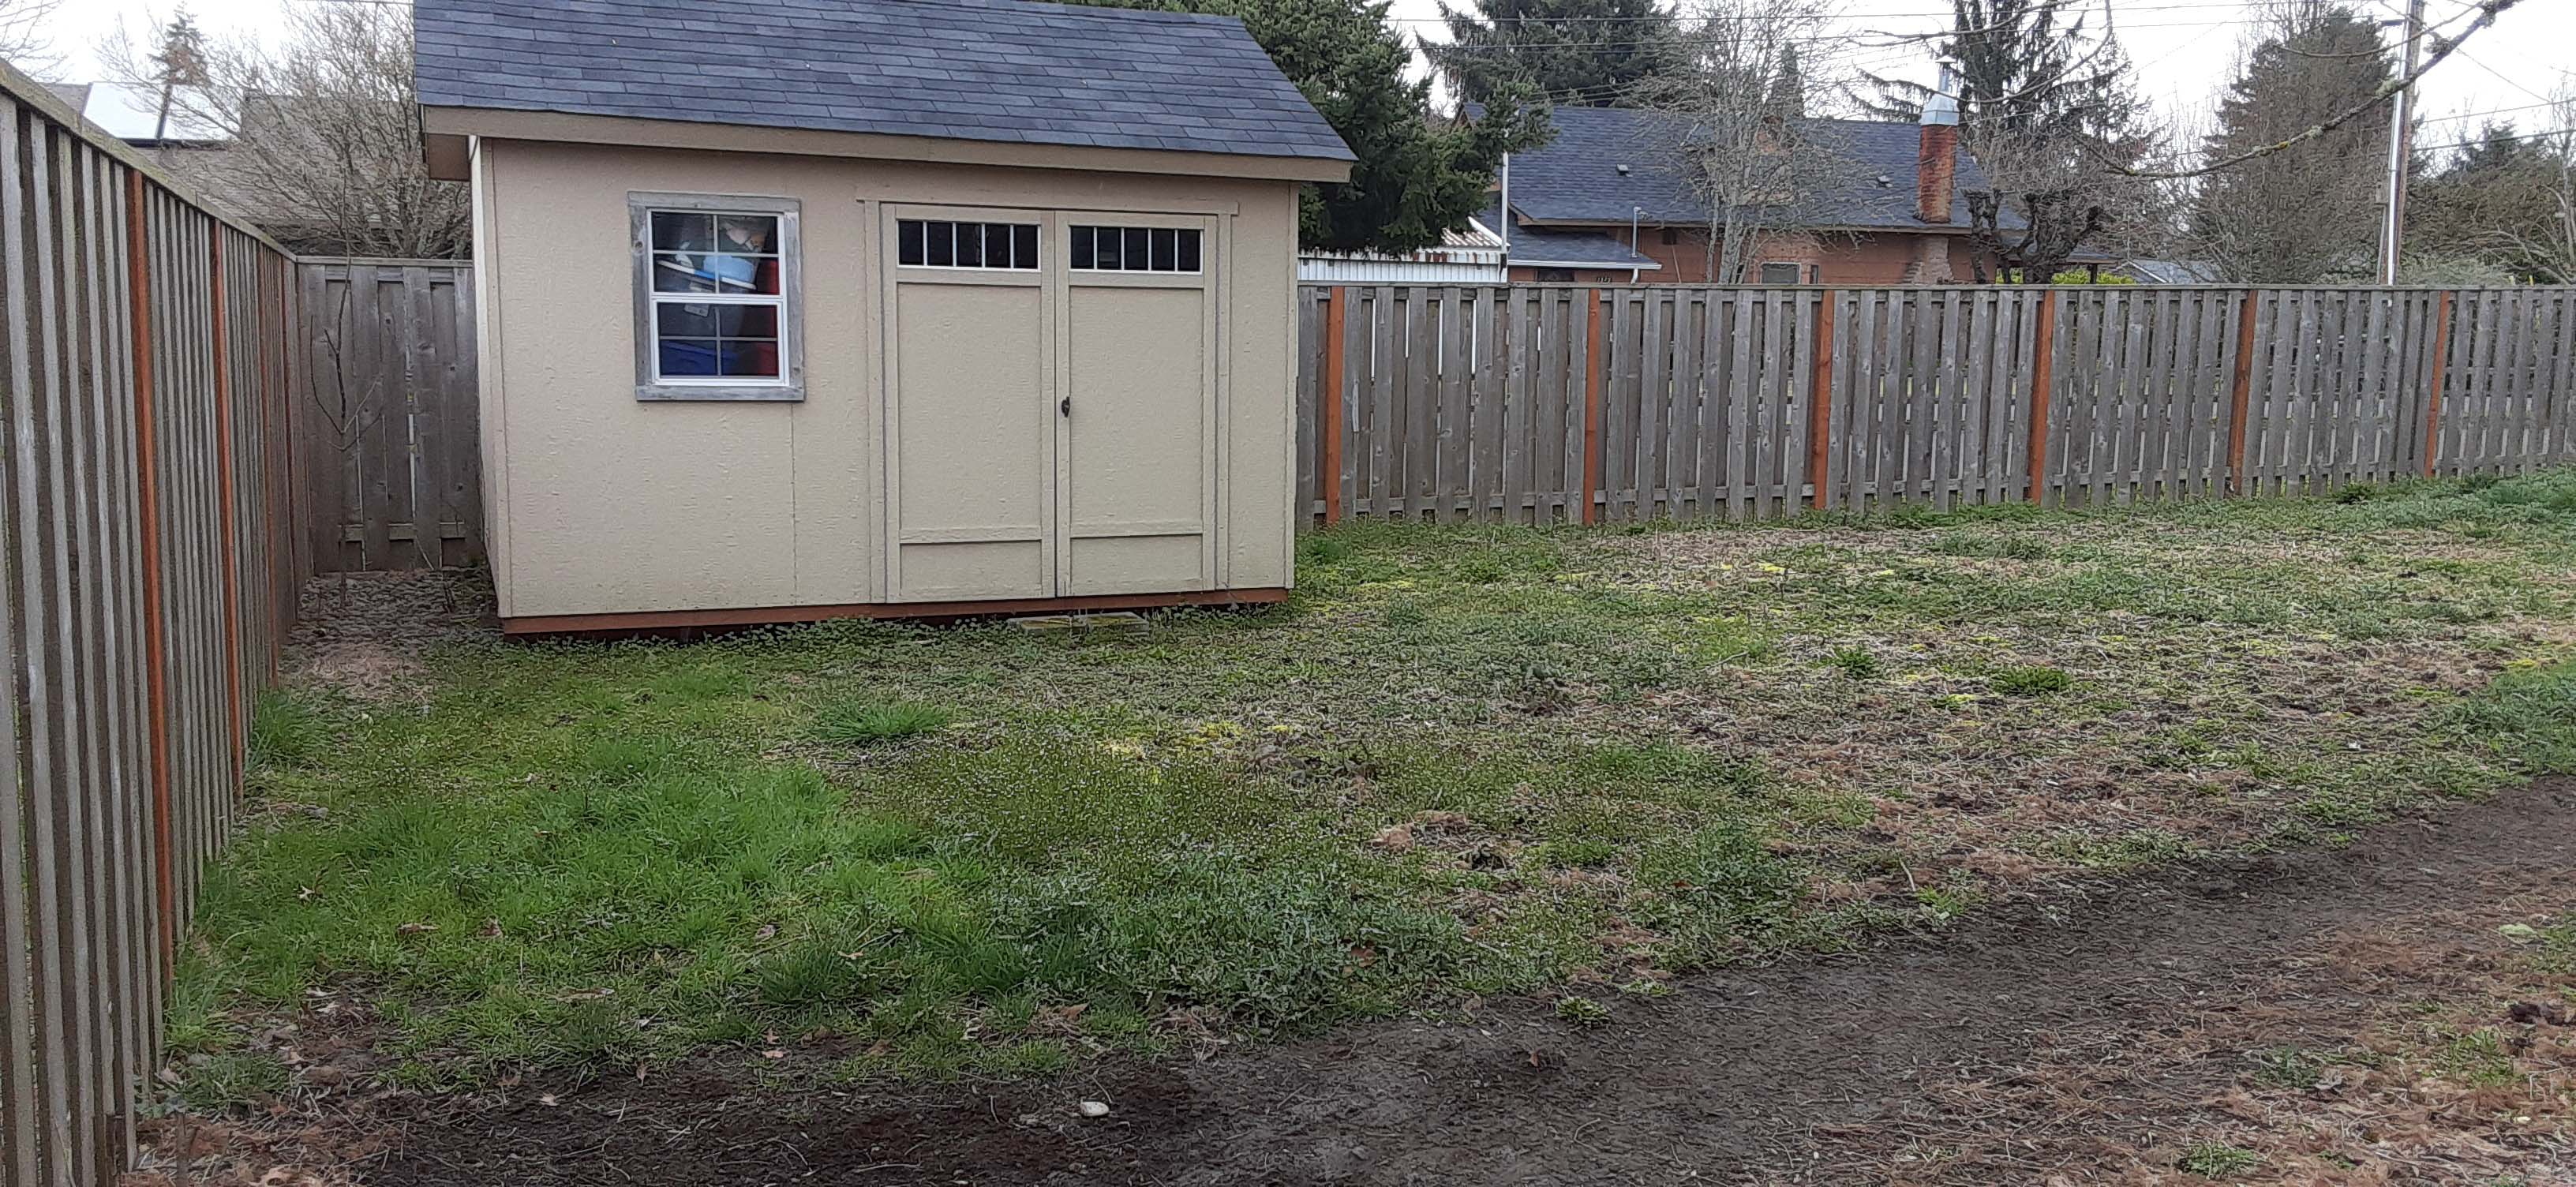 Backyard shed surrounded by patchy grass and a dirt path